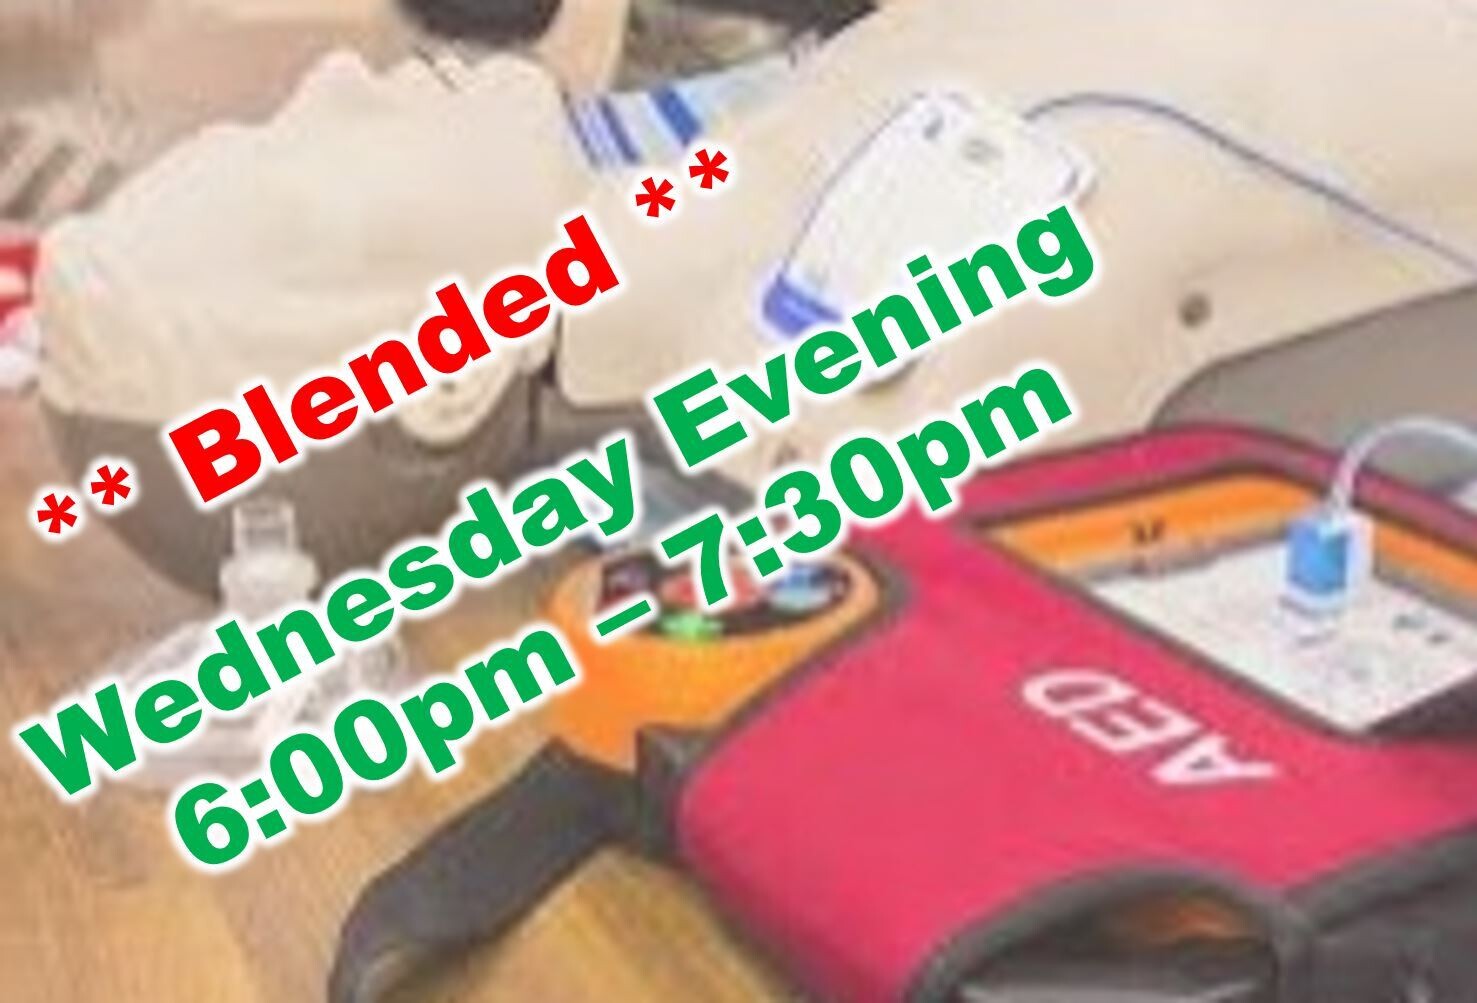 Feb. 9th, 2022 (Wednesday) 6:00pm-7:30pm CPR Class